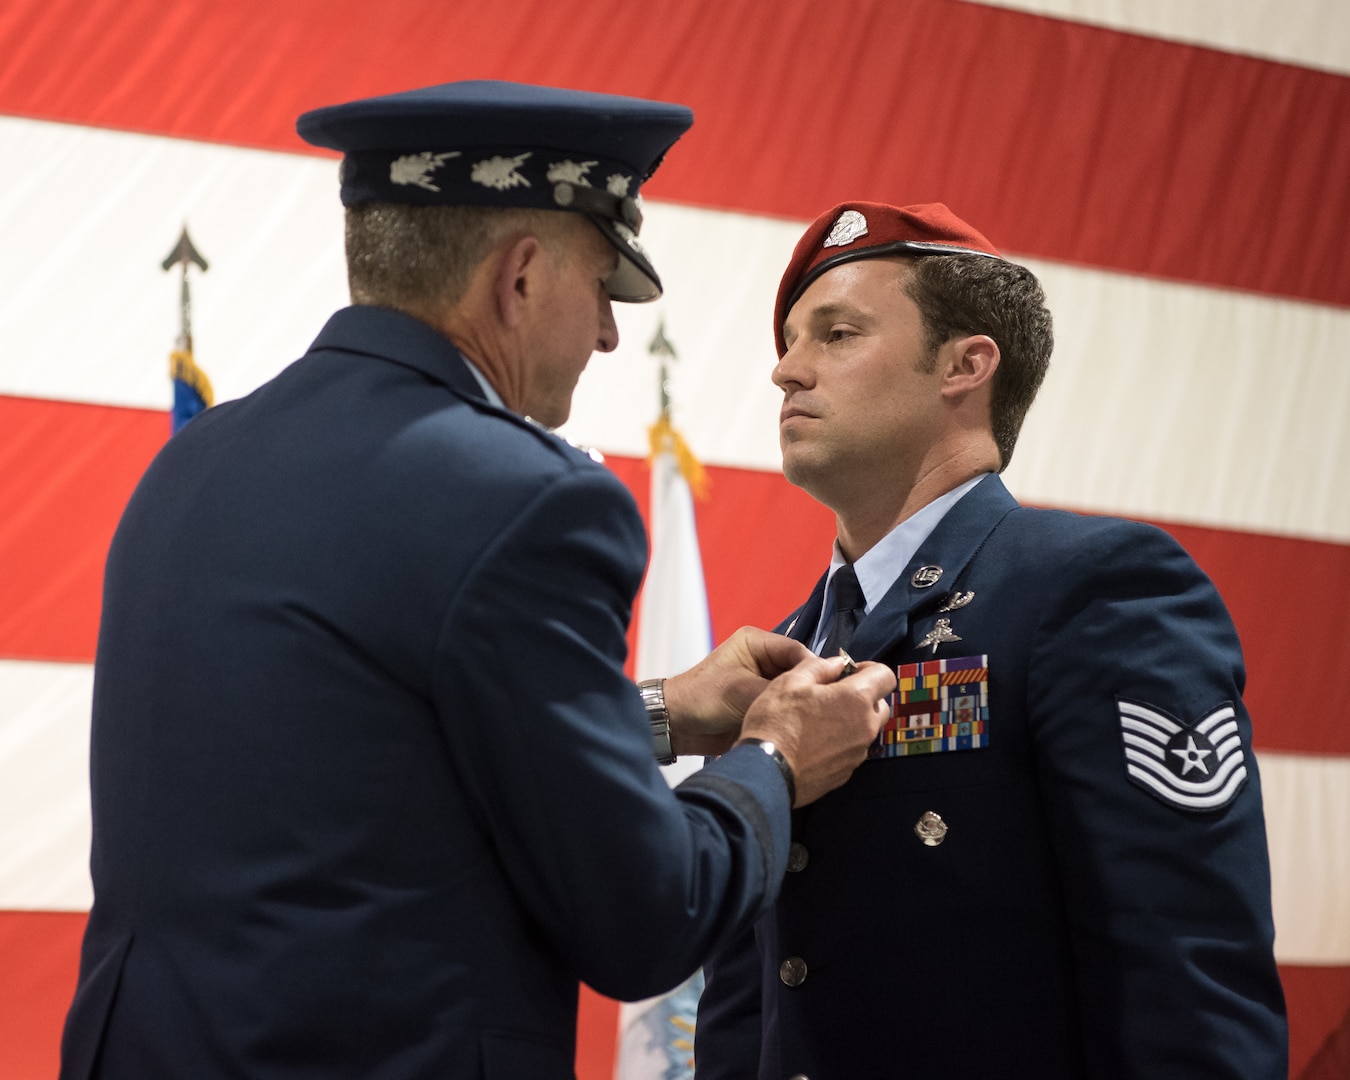 Air Force Chief of Staff Gen. David L. Goldfein (left) pins the Air Force Cross to the uniform of Tech. Sgt. Daniel Keller, a combat controller in the 123rd Special Tactics Squadron, during a ceremony at the Kentucky Air National Guard Base in Louisville, Ky, Aug.13, 2019. Keller earned the award — second only to the Medal of Honor — for valor on the battlefield in Afghanistan.